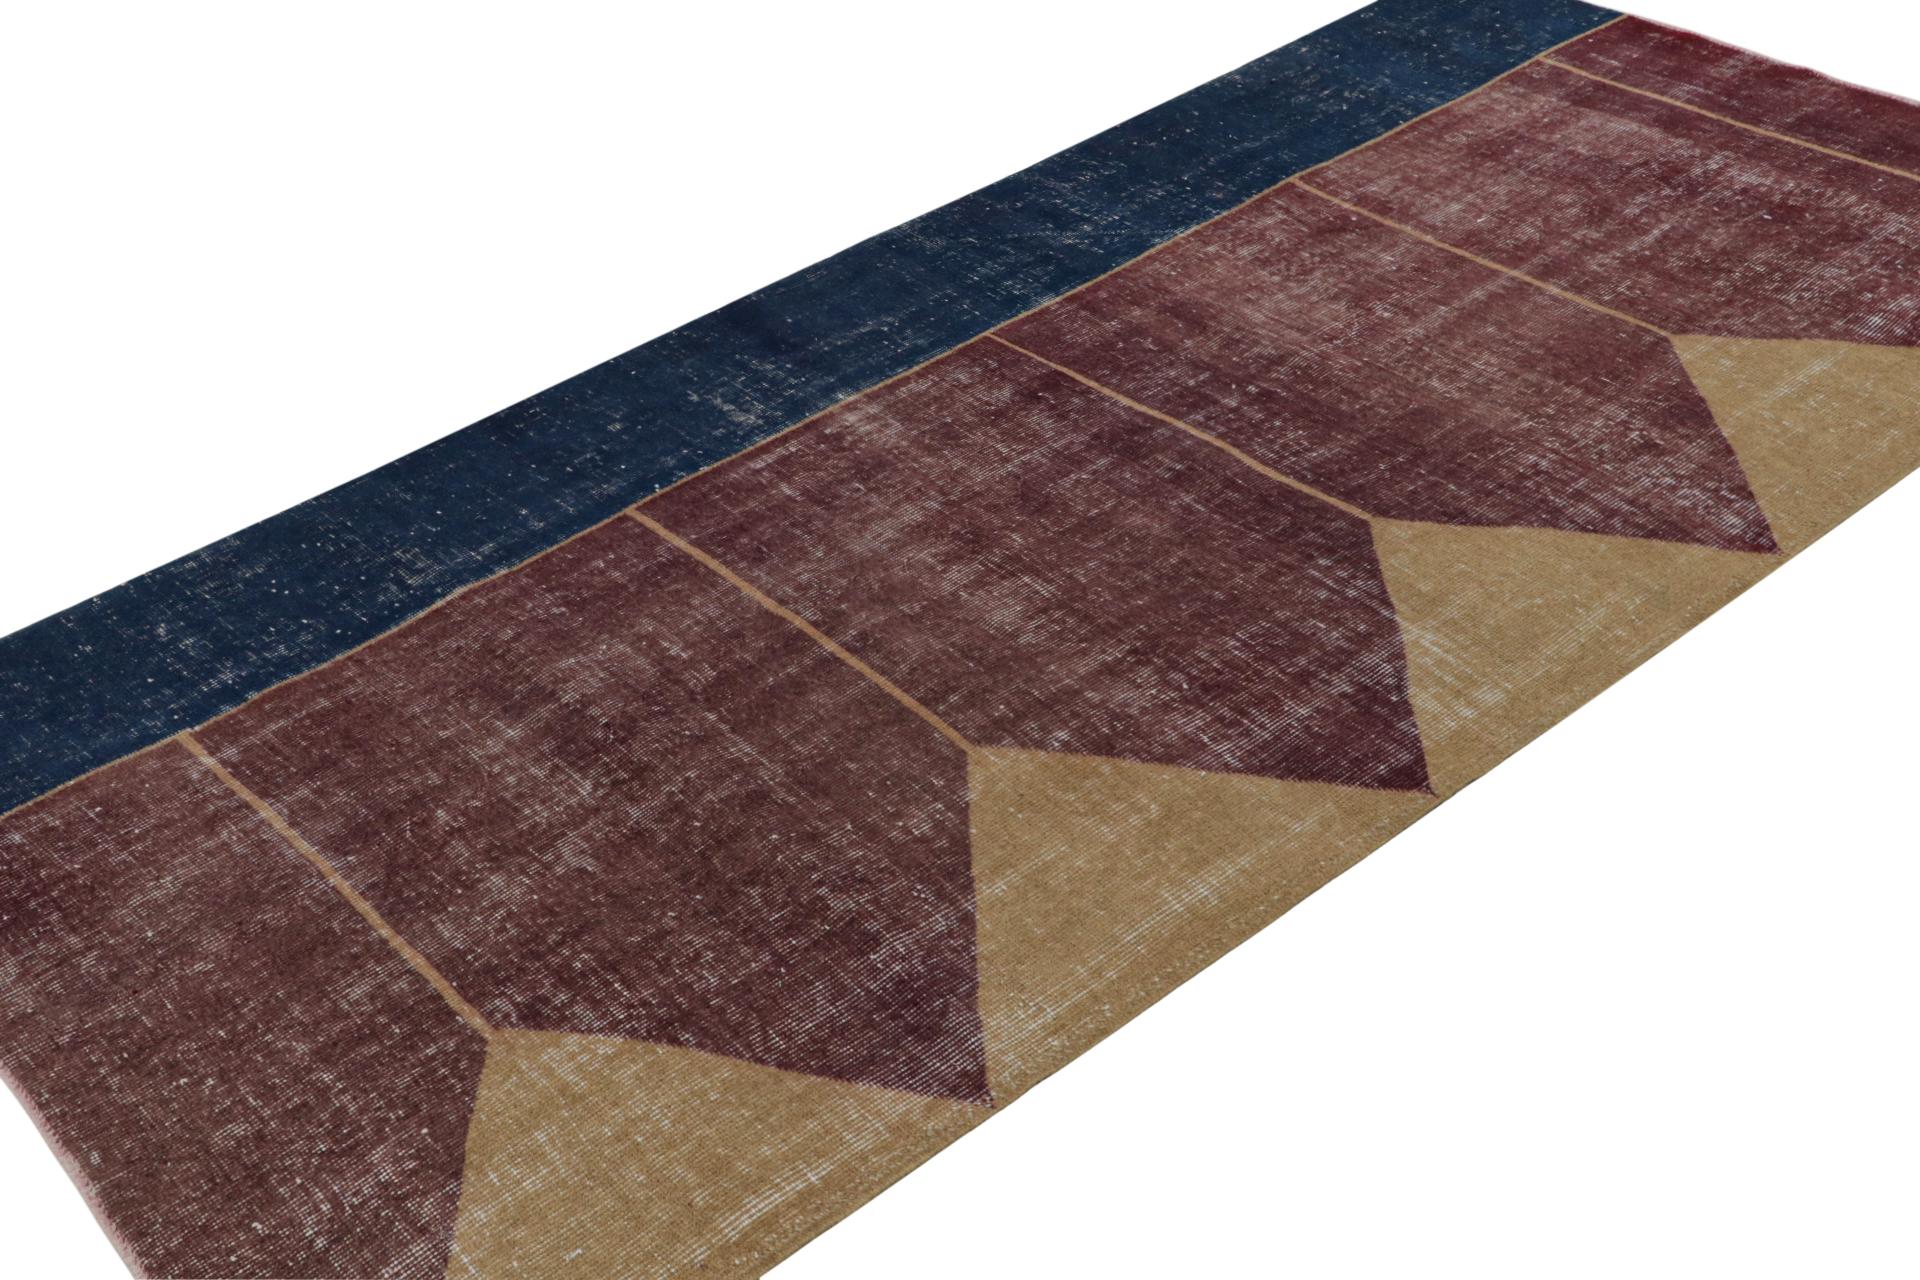 Hand Knotted in wool, this distressed vintage 4x9 Turkish rug, which is inspired by Saf rugs, a particular kind of prayer rug, features a copper brown field and geometric patterns in hues of bronze and navy blue.  

On the Design: 

Connoisseurs